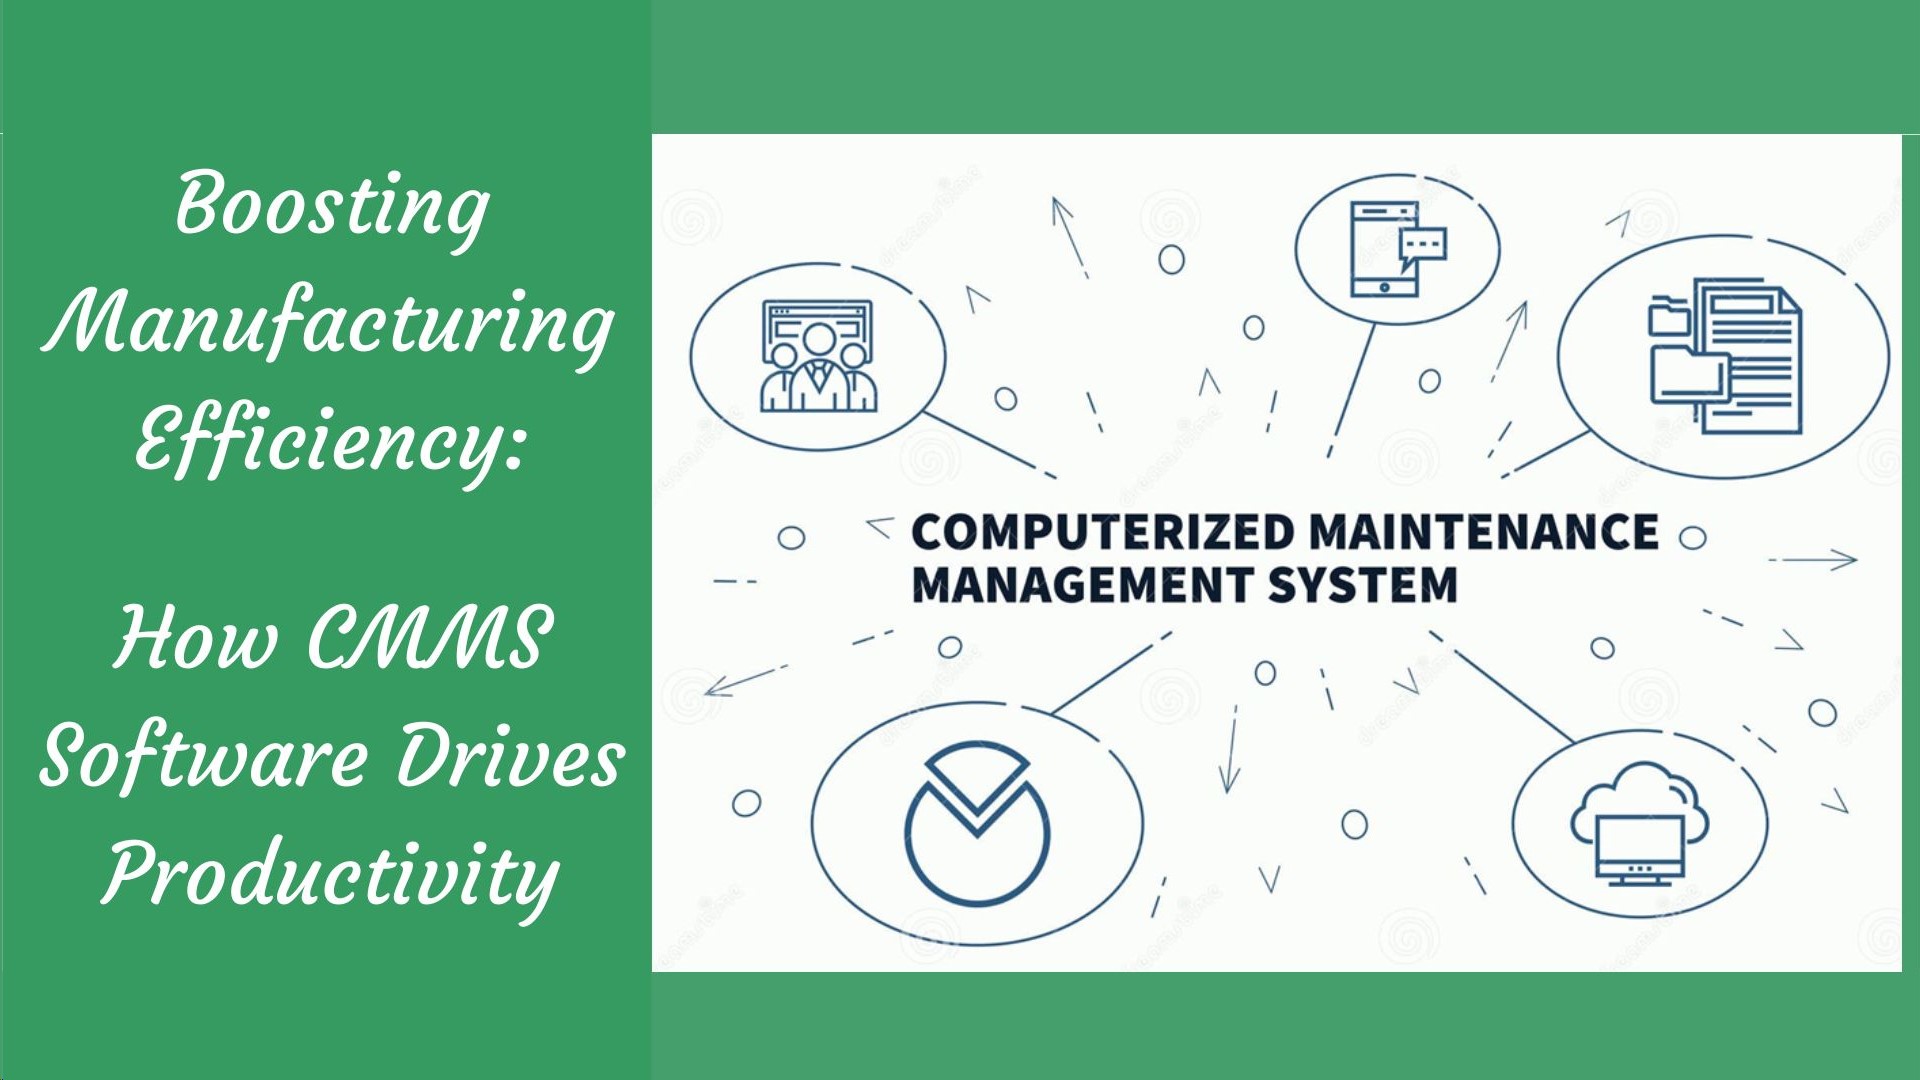 Boosting Manufacturing Efficiency: How CMMS Software Drives Productivity